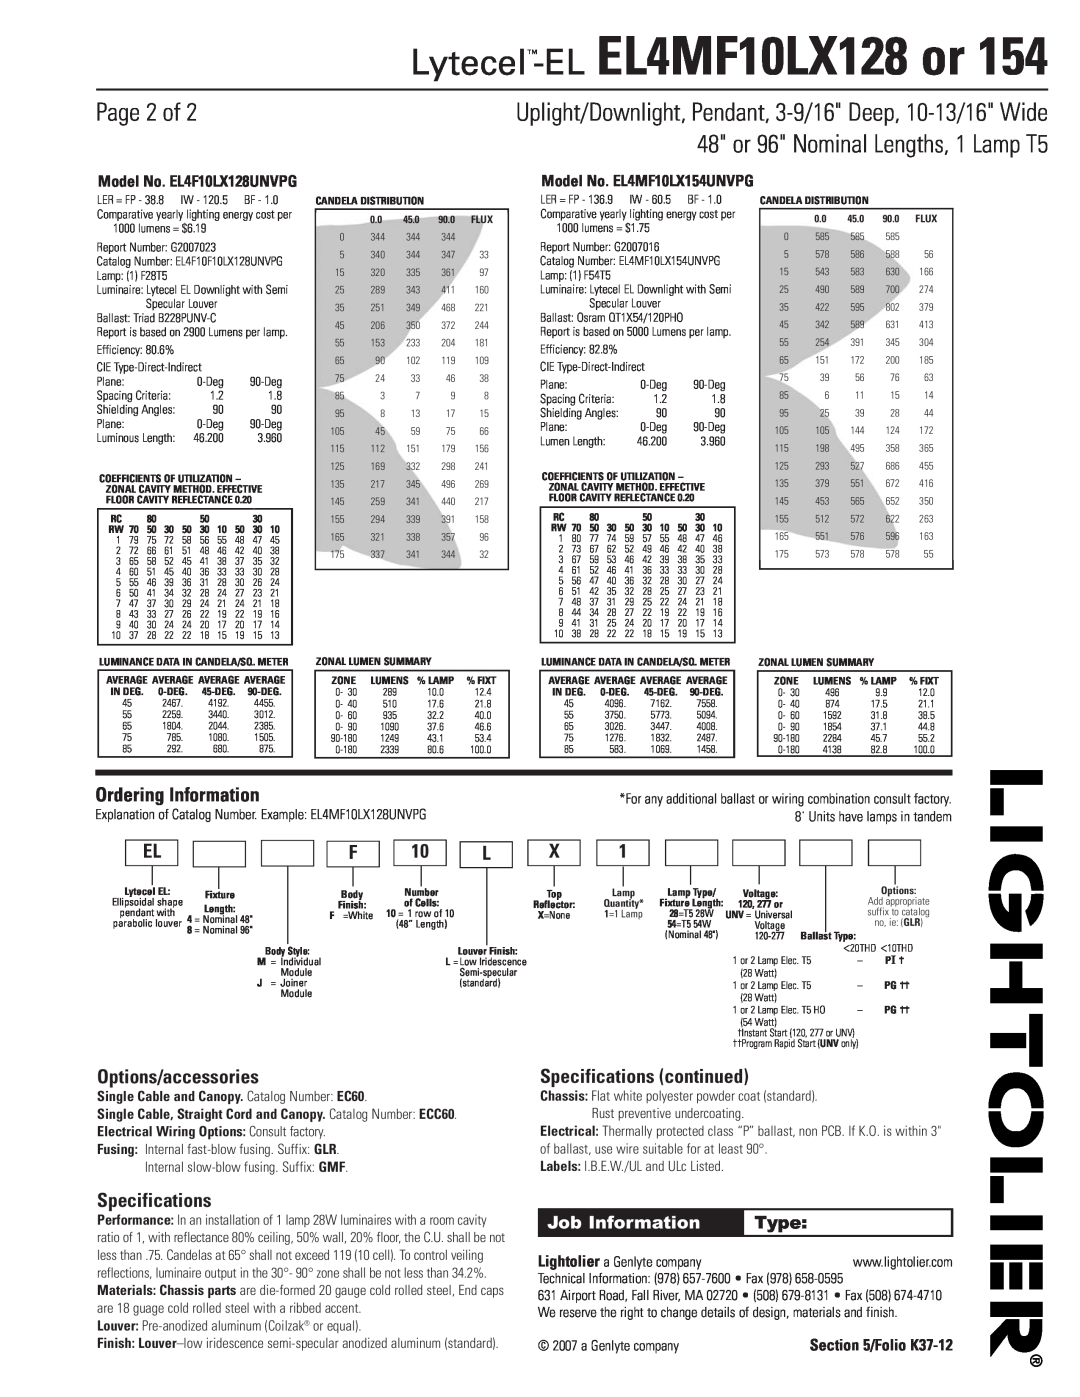 Lightolier dimensions Page 2 of, Lytecel-EL EL4MF10LX128 or, Ordering Information, Options/accessories, Specifications 